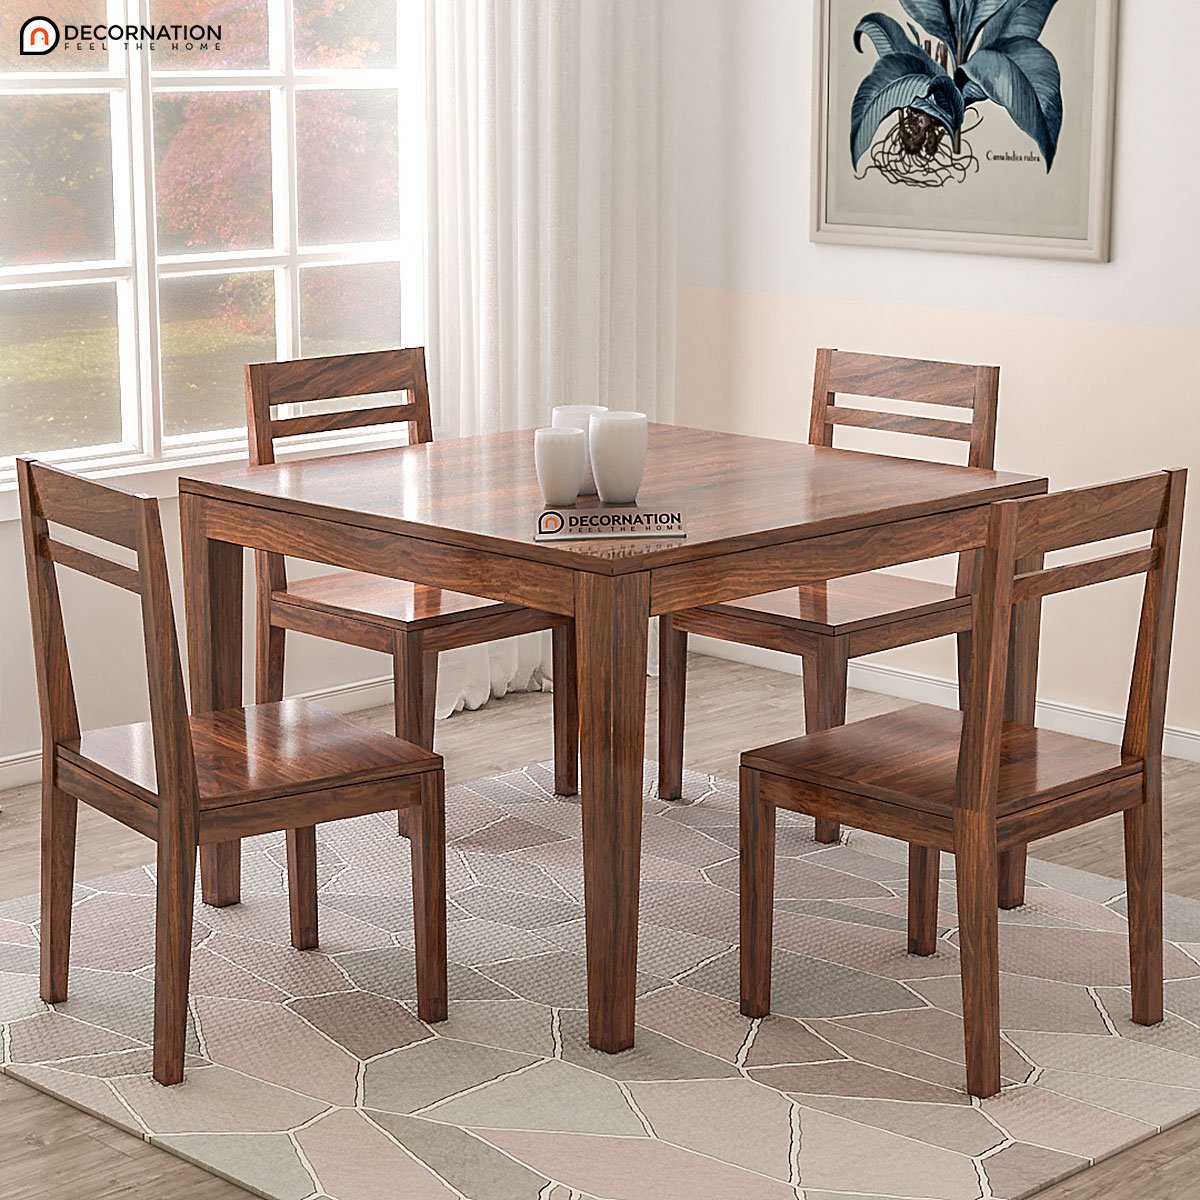 Bouillon Wooden 4 Seater Dining Table Set